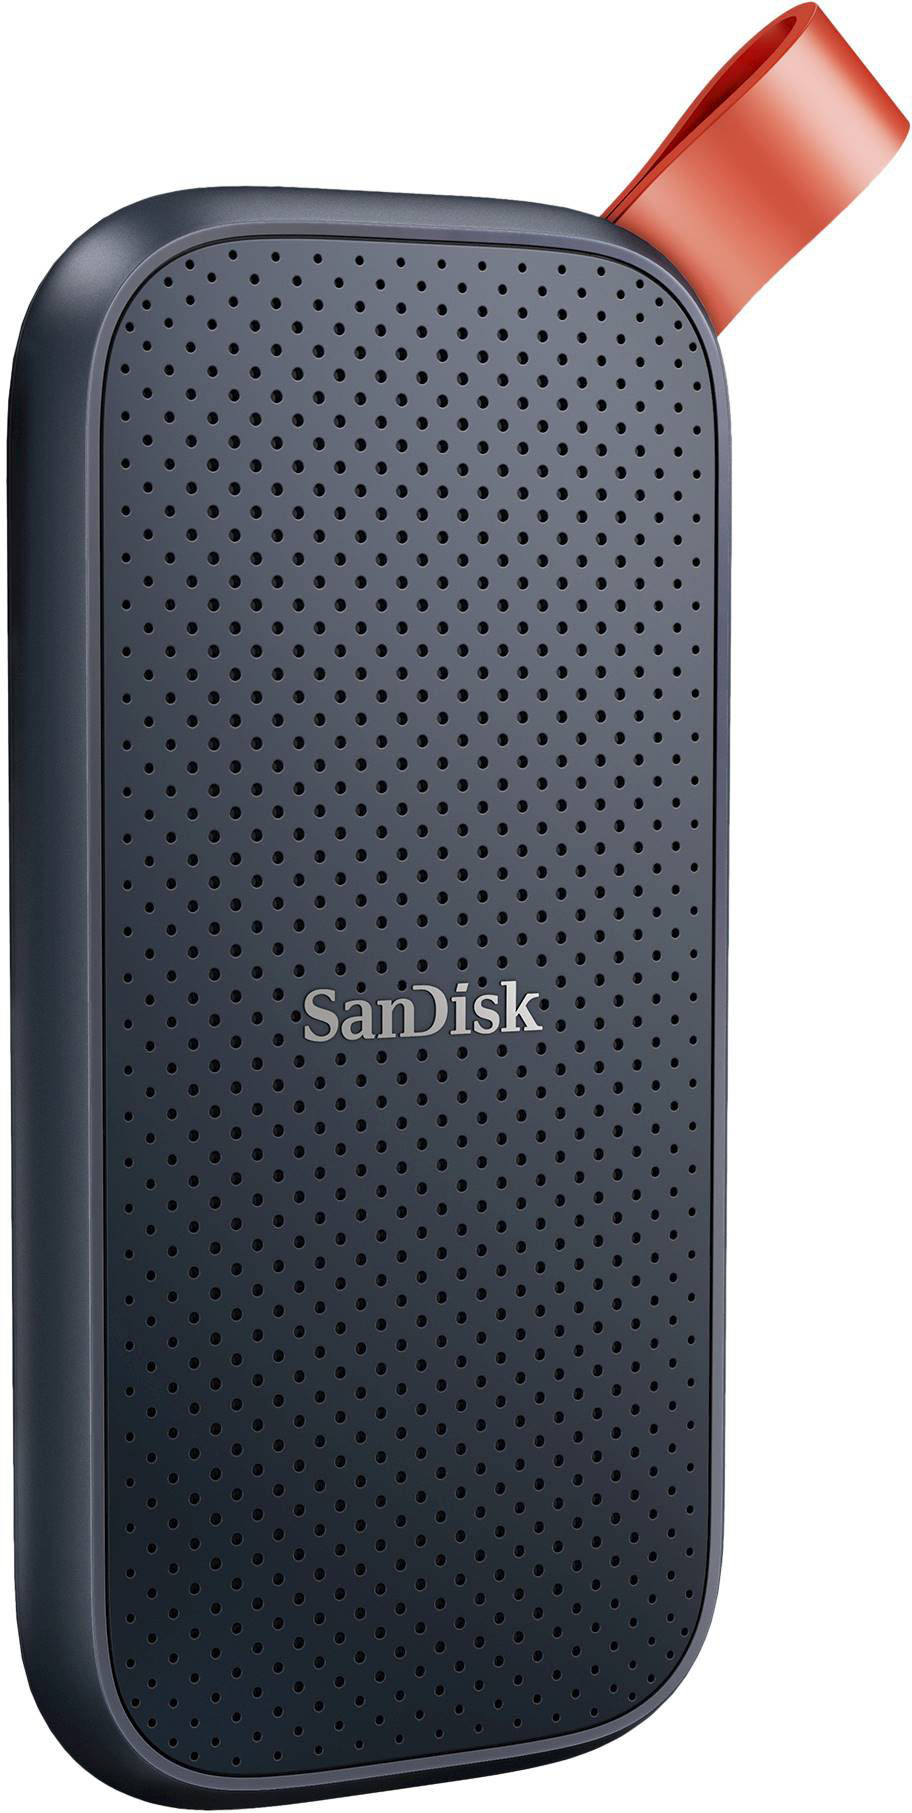 Angle View: Samsung - Geek Squad Certified Refurbished T7 2TB External USB 3.2 Gen 2 Portable Solid State Drive with Hardware Encryption - Indigo Blue